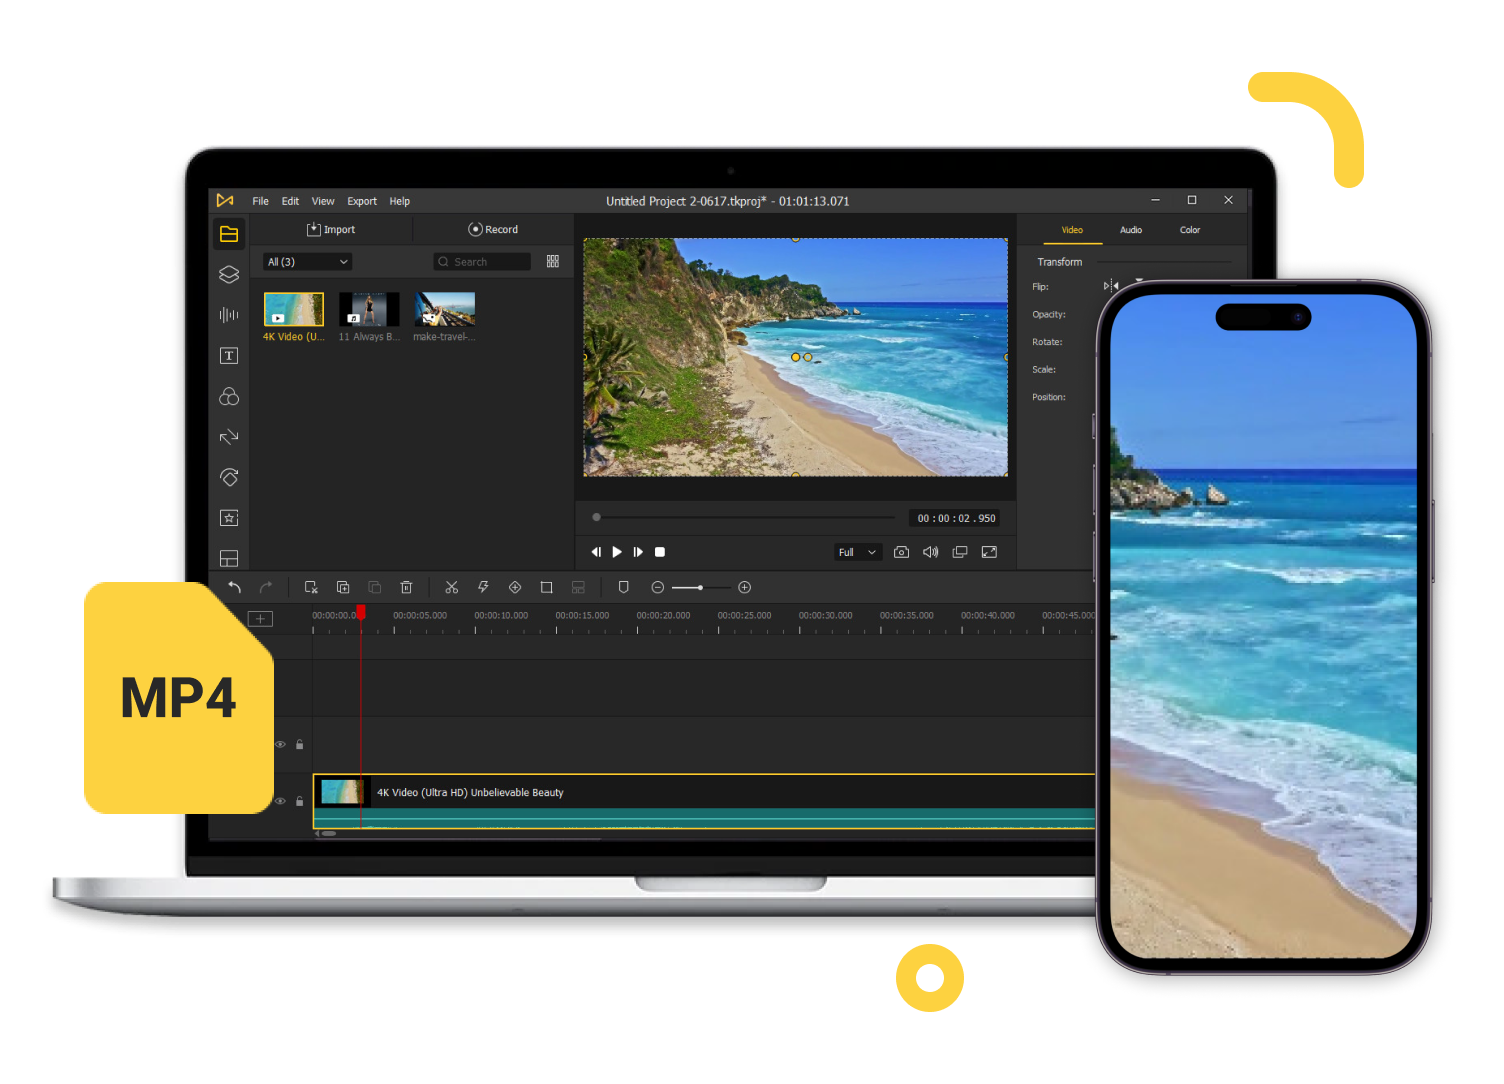 AceMovi Video Editor download the last version for mac